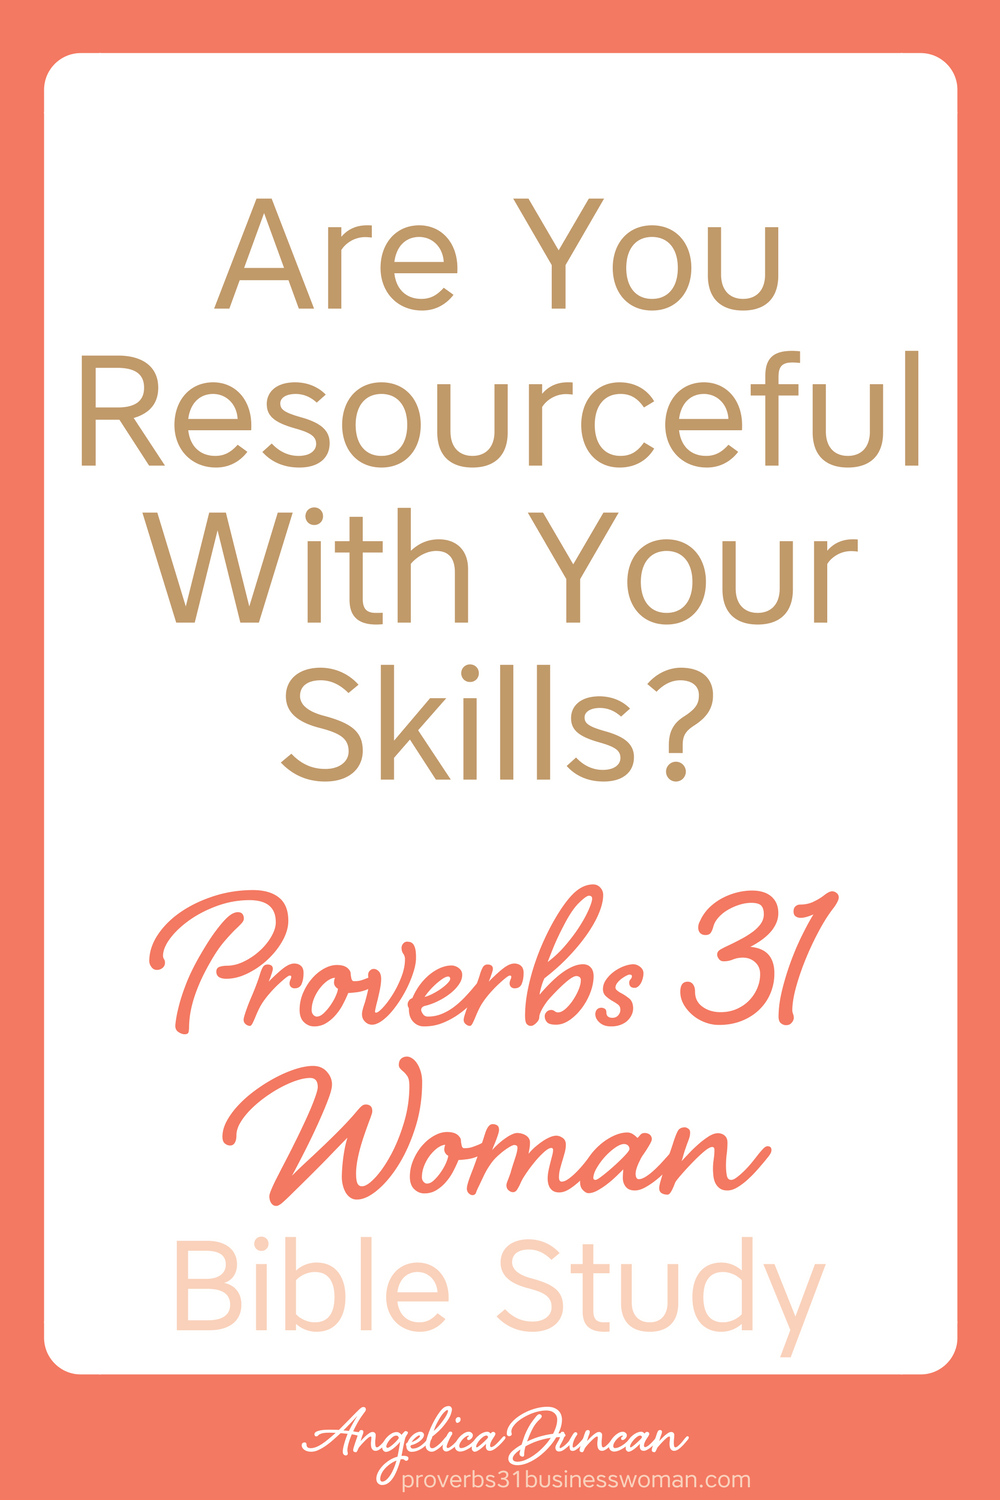 They say it takes skills to pay the bills, right? Let's find out how to use your skills to bless your family BIG in our Proverbs 31 Woman Bible Study! #p31 #proverbs31woman #proverbs31businesswoman #biblestudy #christianblogger #jesusgirl